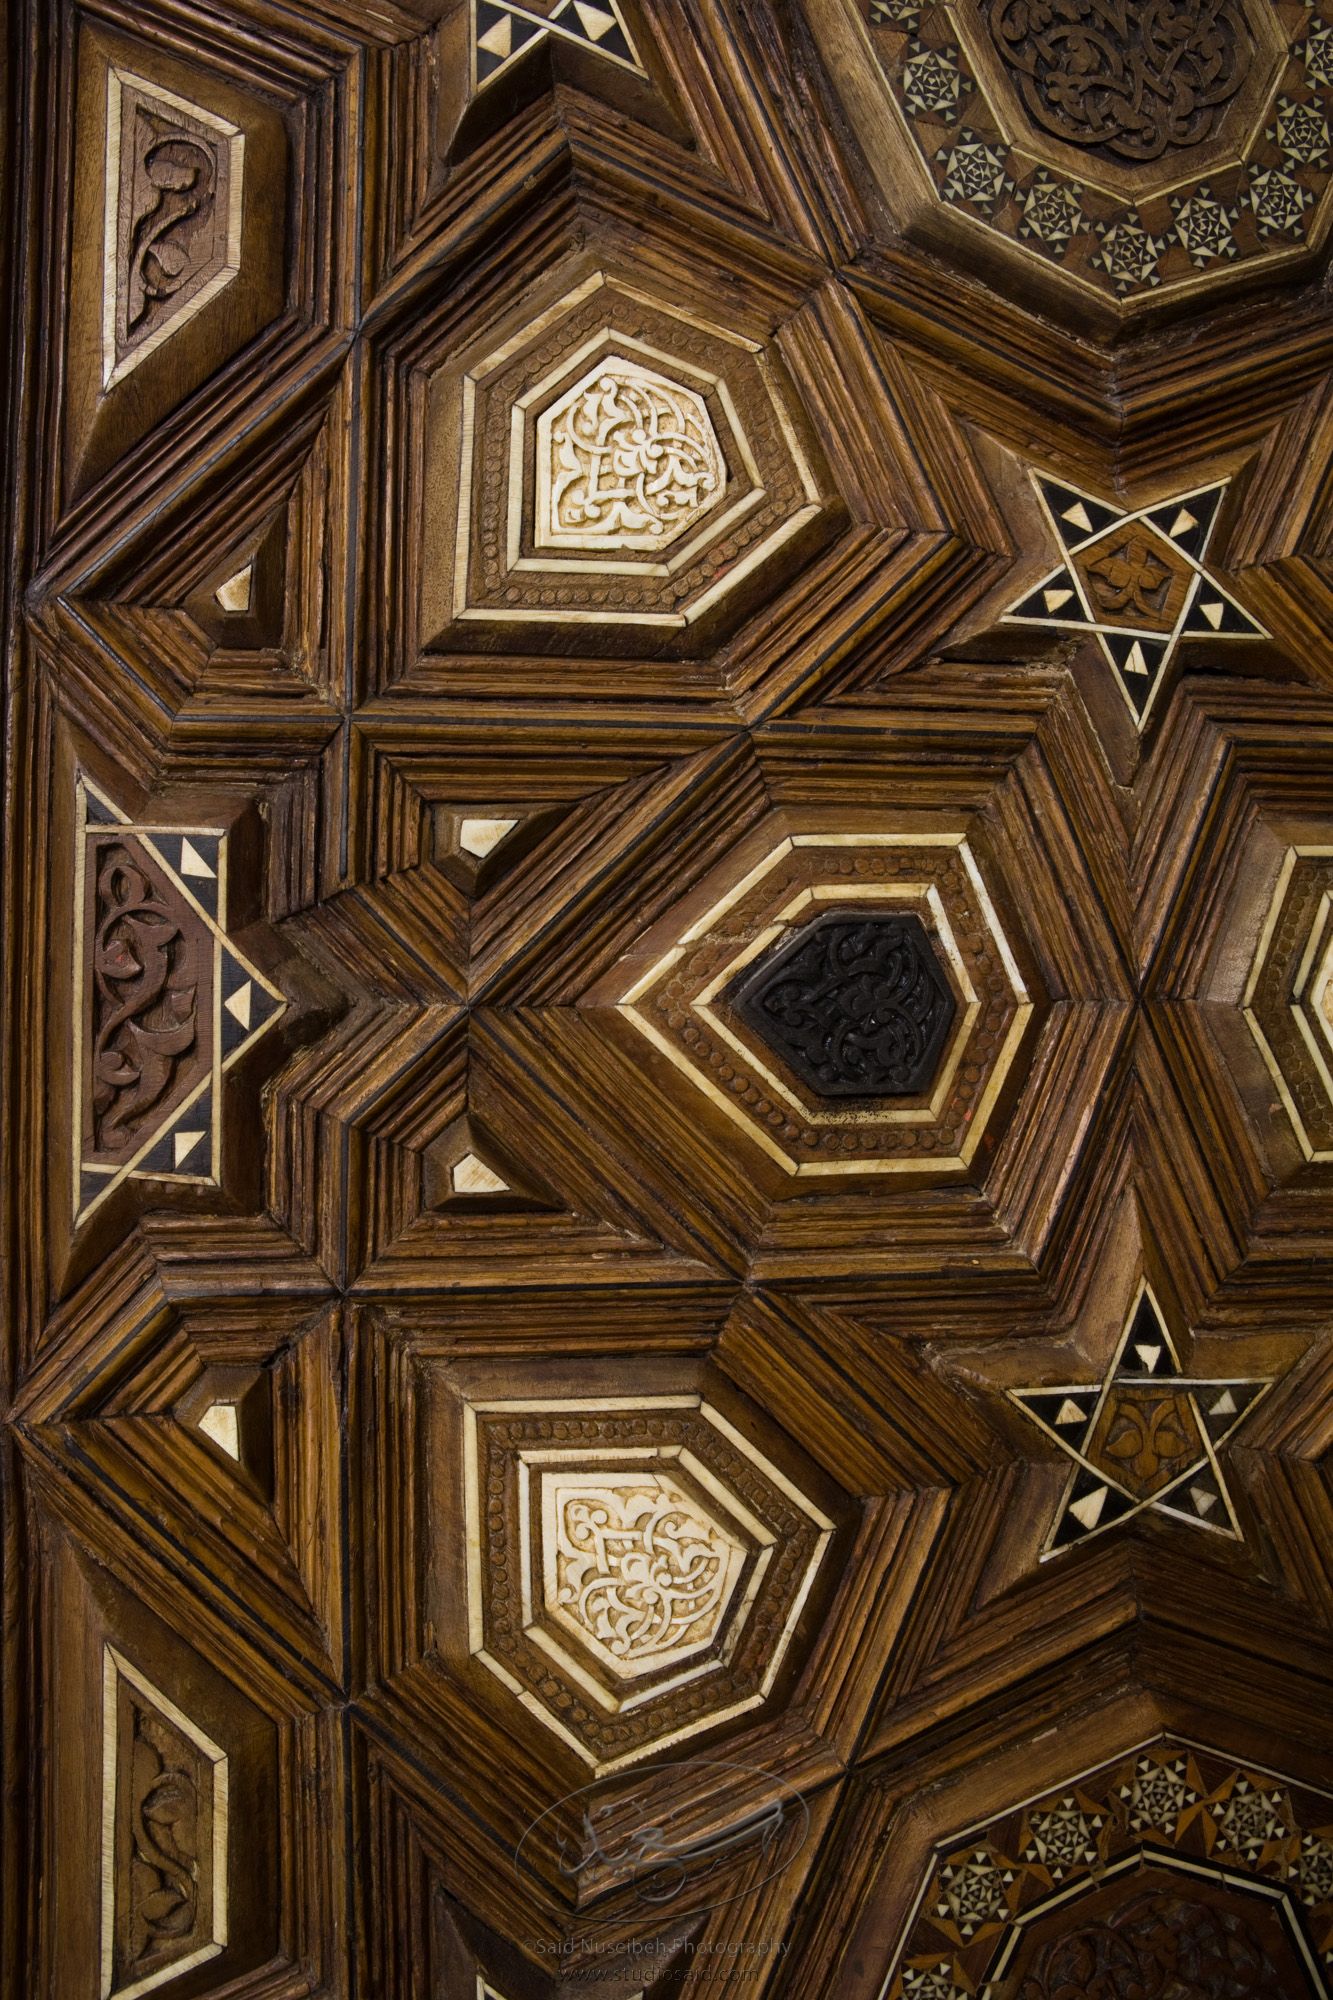 "Minbar, Carved Woodwork and Inlay Detail"The late-13th / early-14th c. Mamluk minbar, or pulpit, of Sultan al-Nasir Muhammad, the ninth Mamluk Sultan from Cairo and son of Qalawun. The minbar was located in the Umayyad Mosque in Aleppo, Haleb, prior to its damage and disappearance in May 2013.